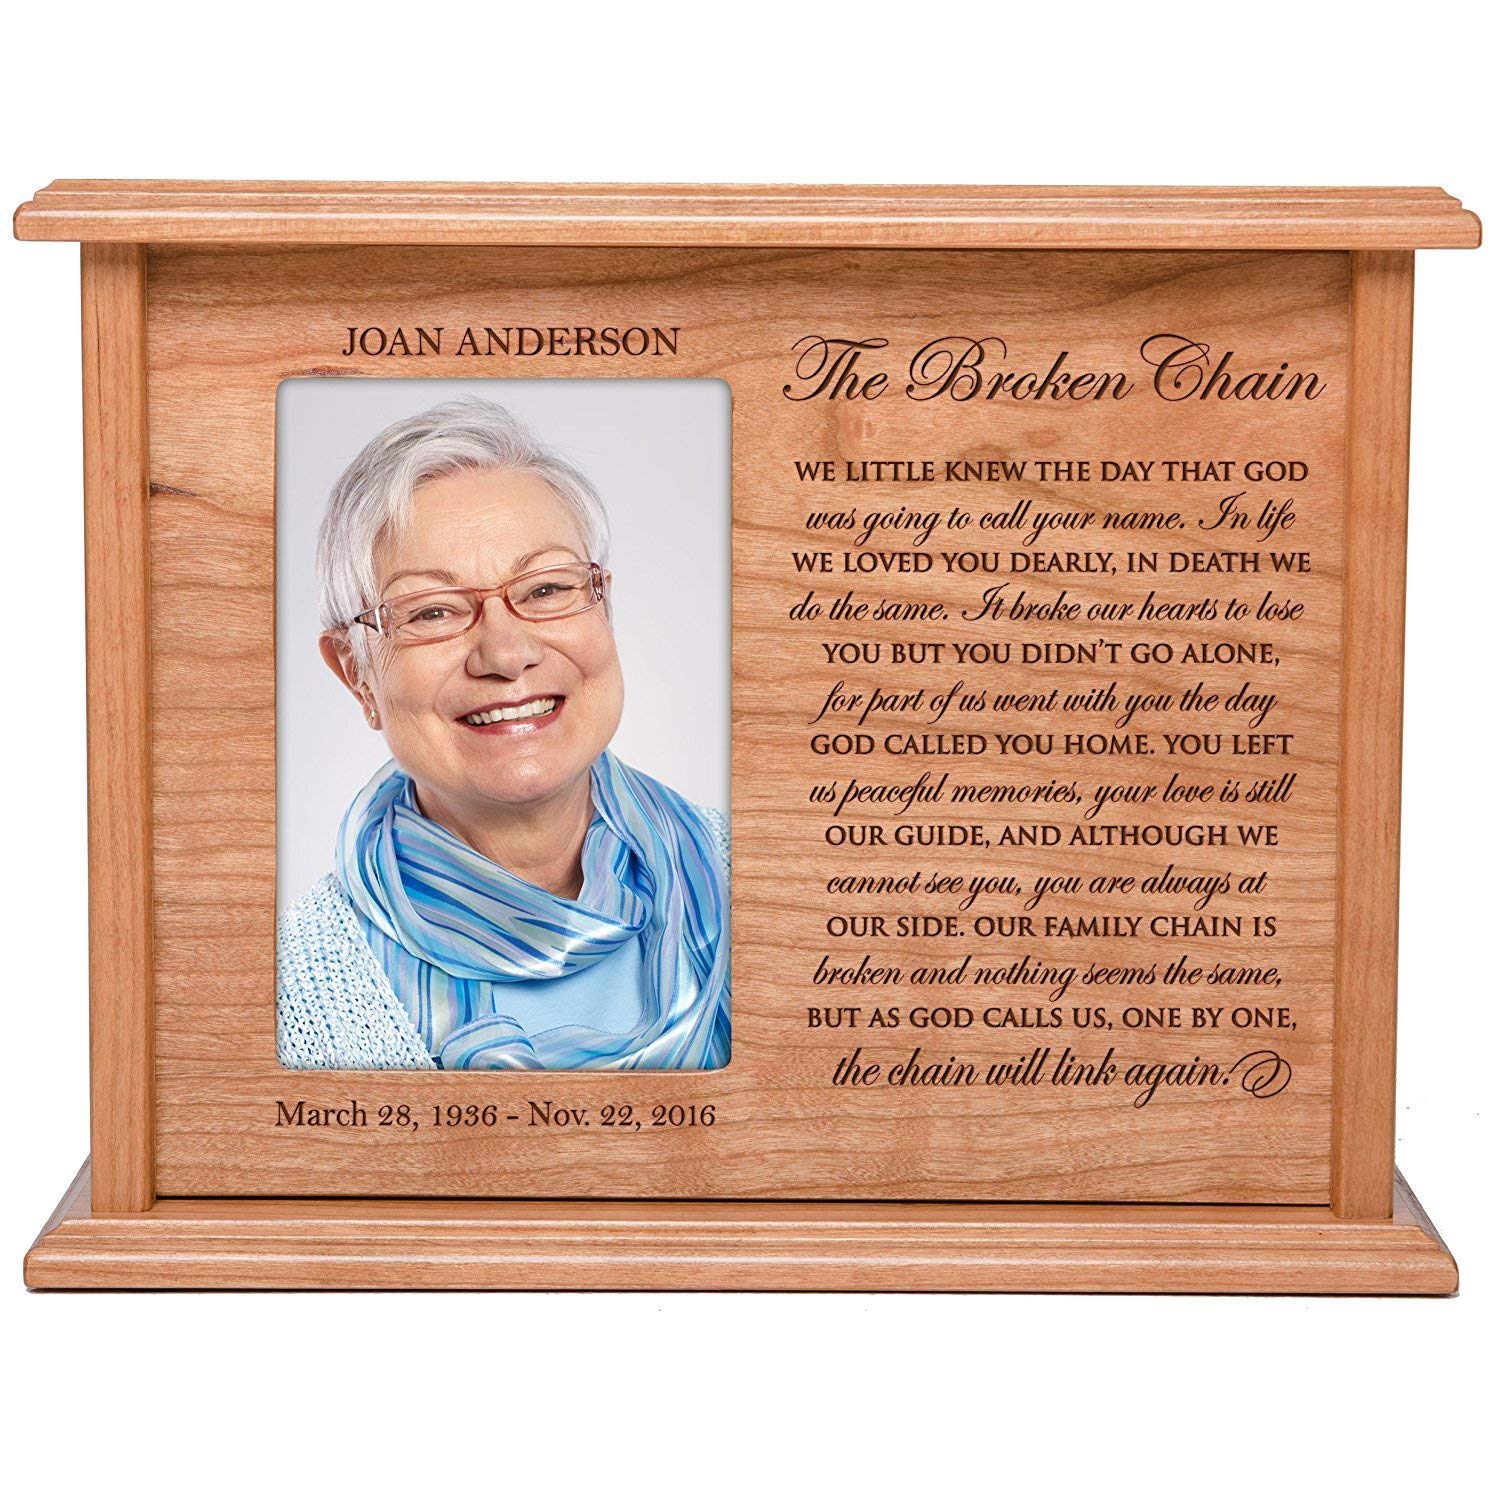 Custom Engraved Cherry Wood Urn Box with 4x6 Photo holds 200 cu in of Human Ashes The Broken Chain - LifeSong Milestones